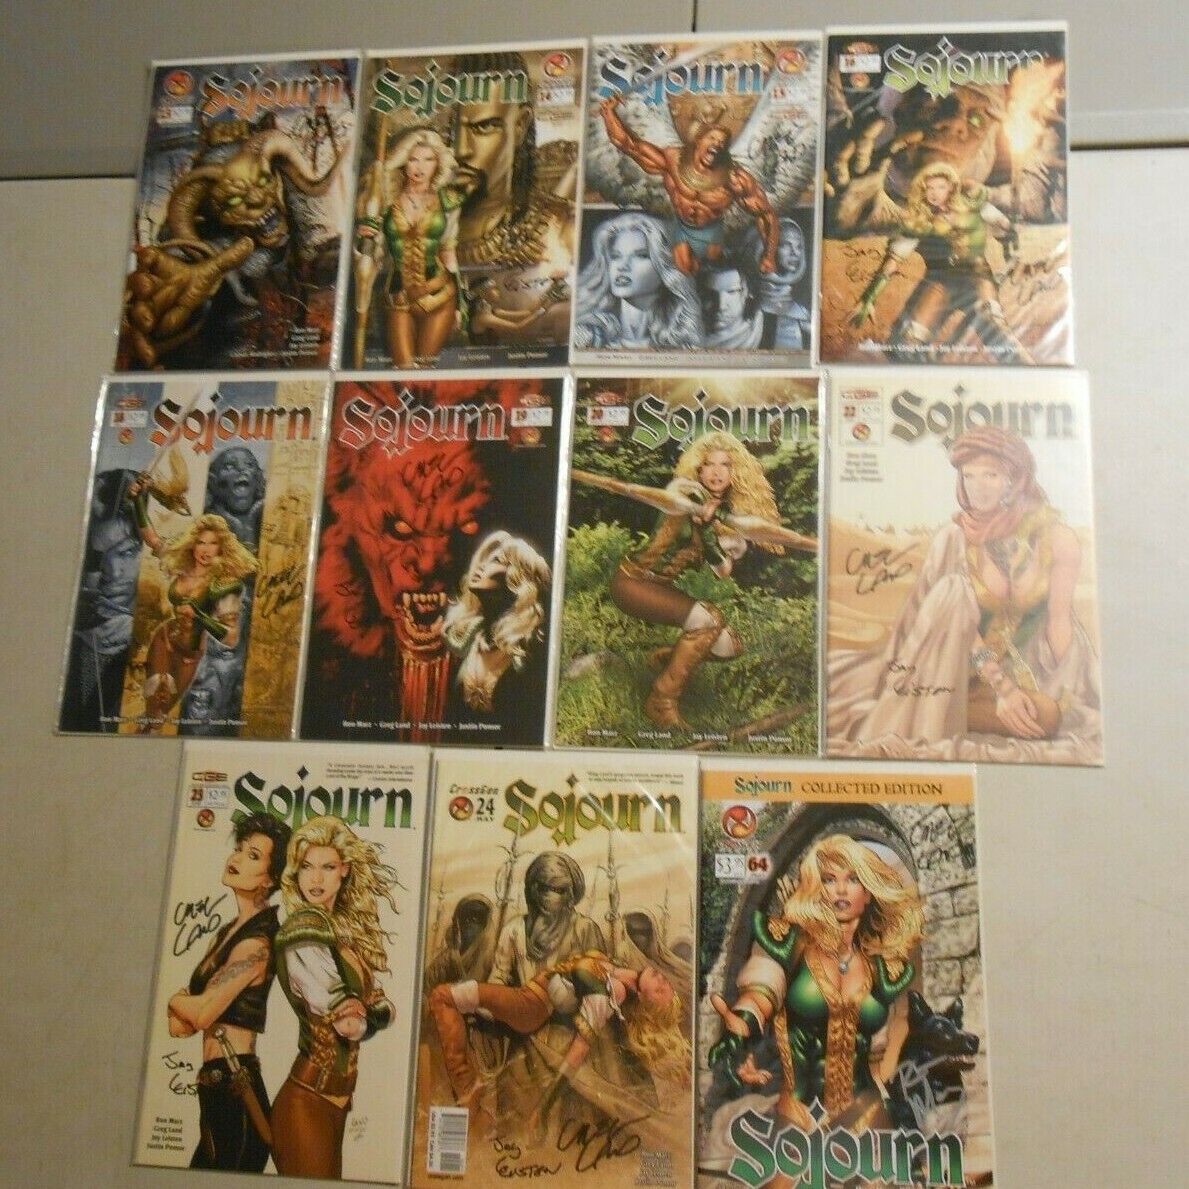 Sojourn #13-16 18-20 22-24 & Collectors Edition Double Signed Greg Land, Leisten